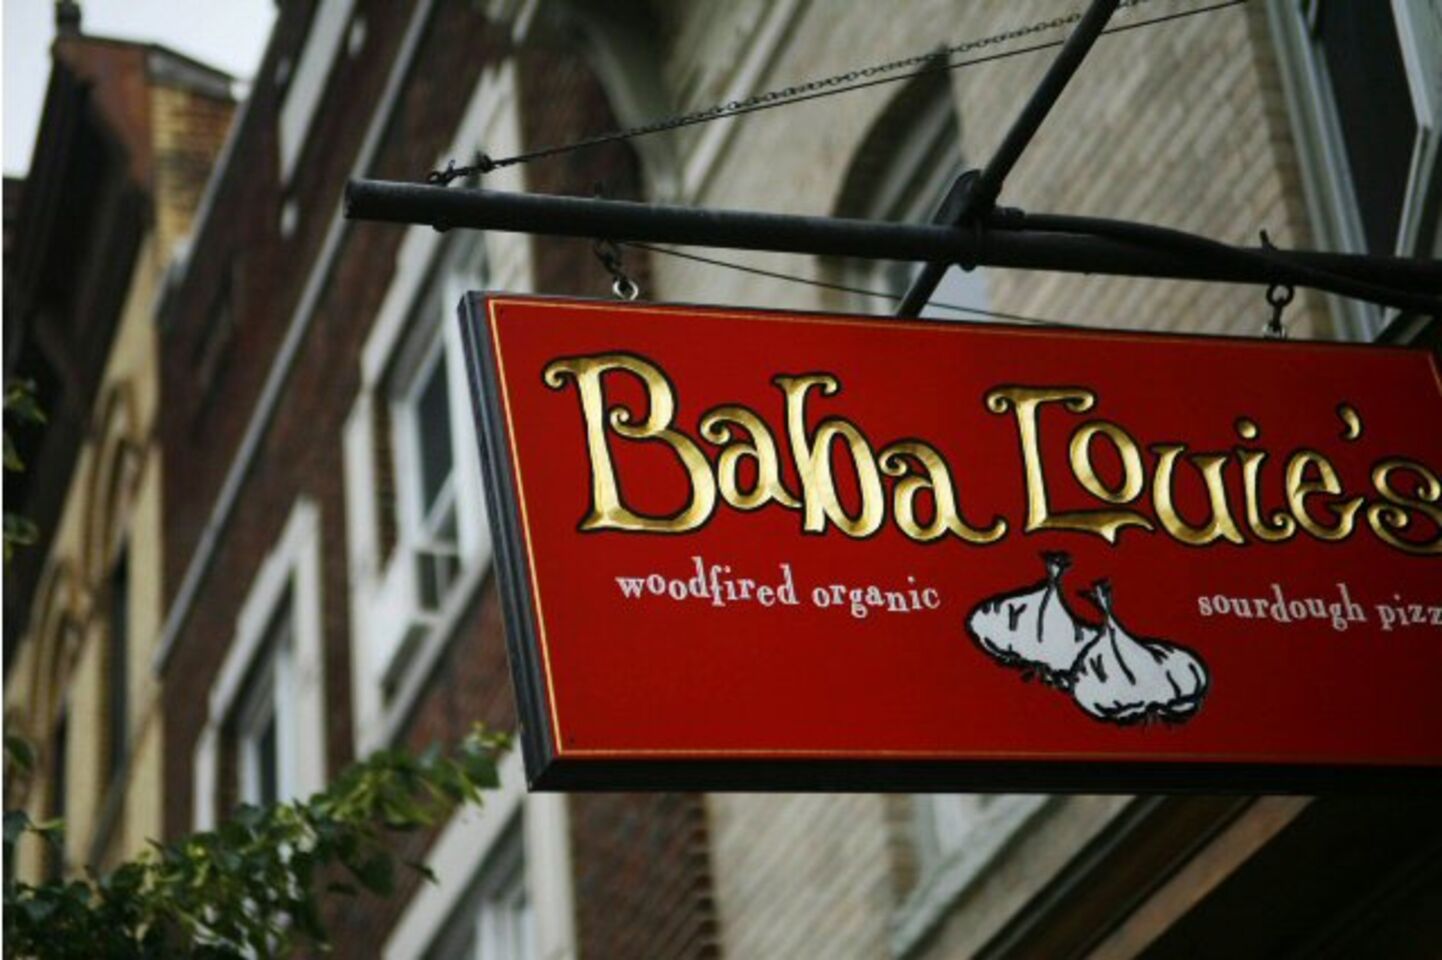 A photo of Baba Louie's